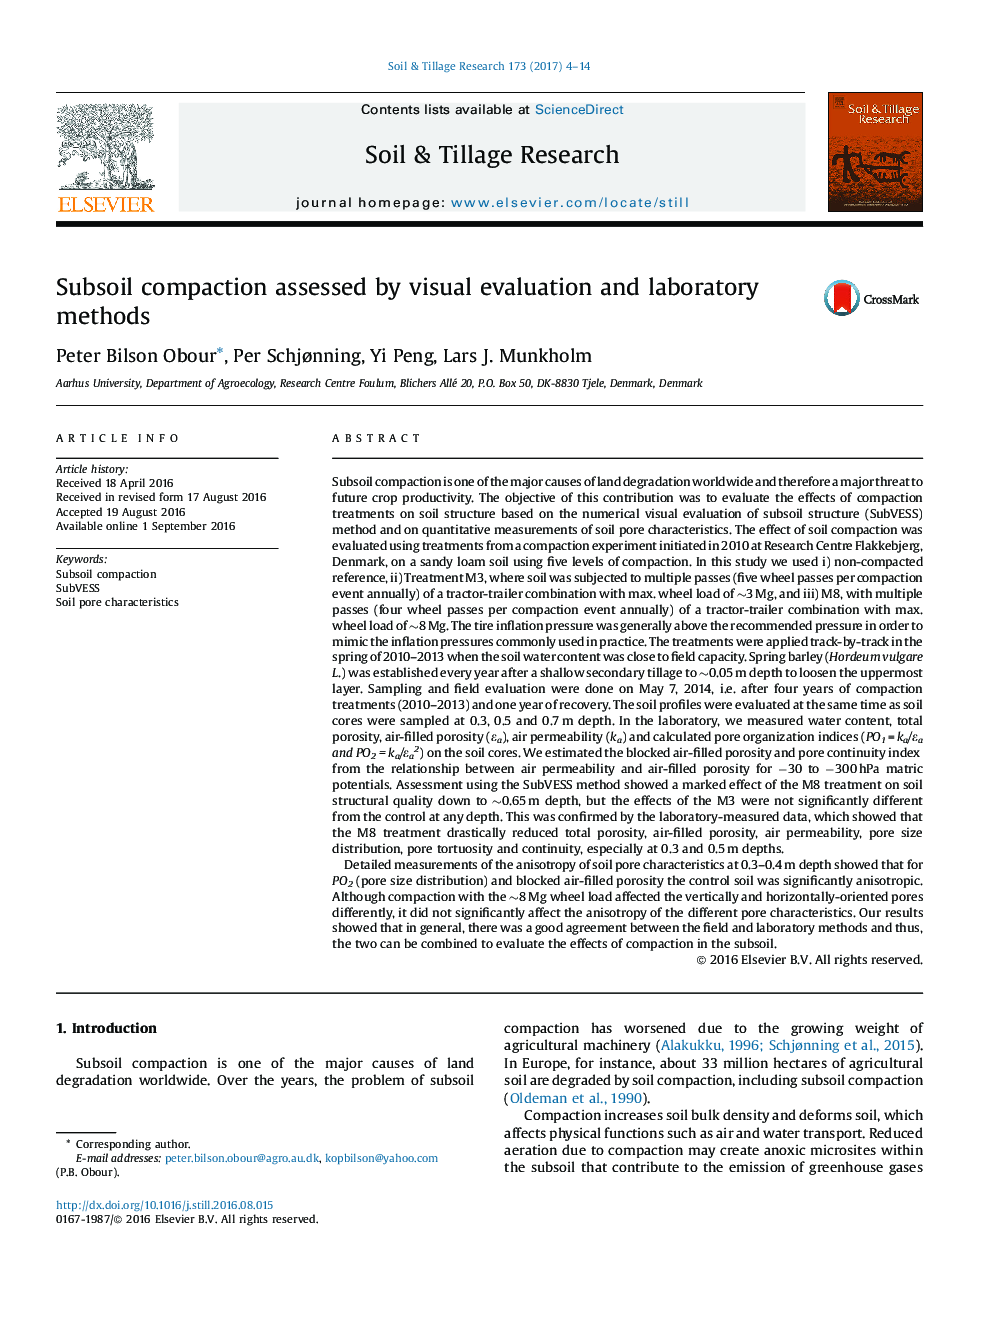 Subsoil compaction assessed by visual evaluation and laboratory methods